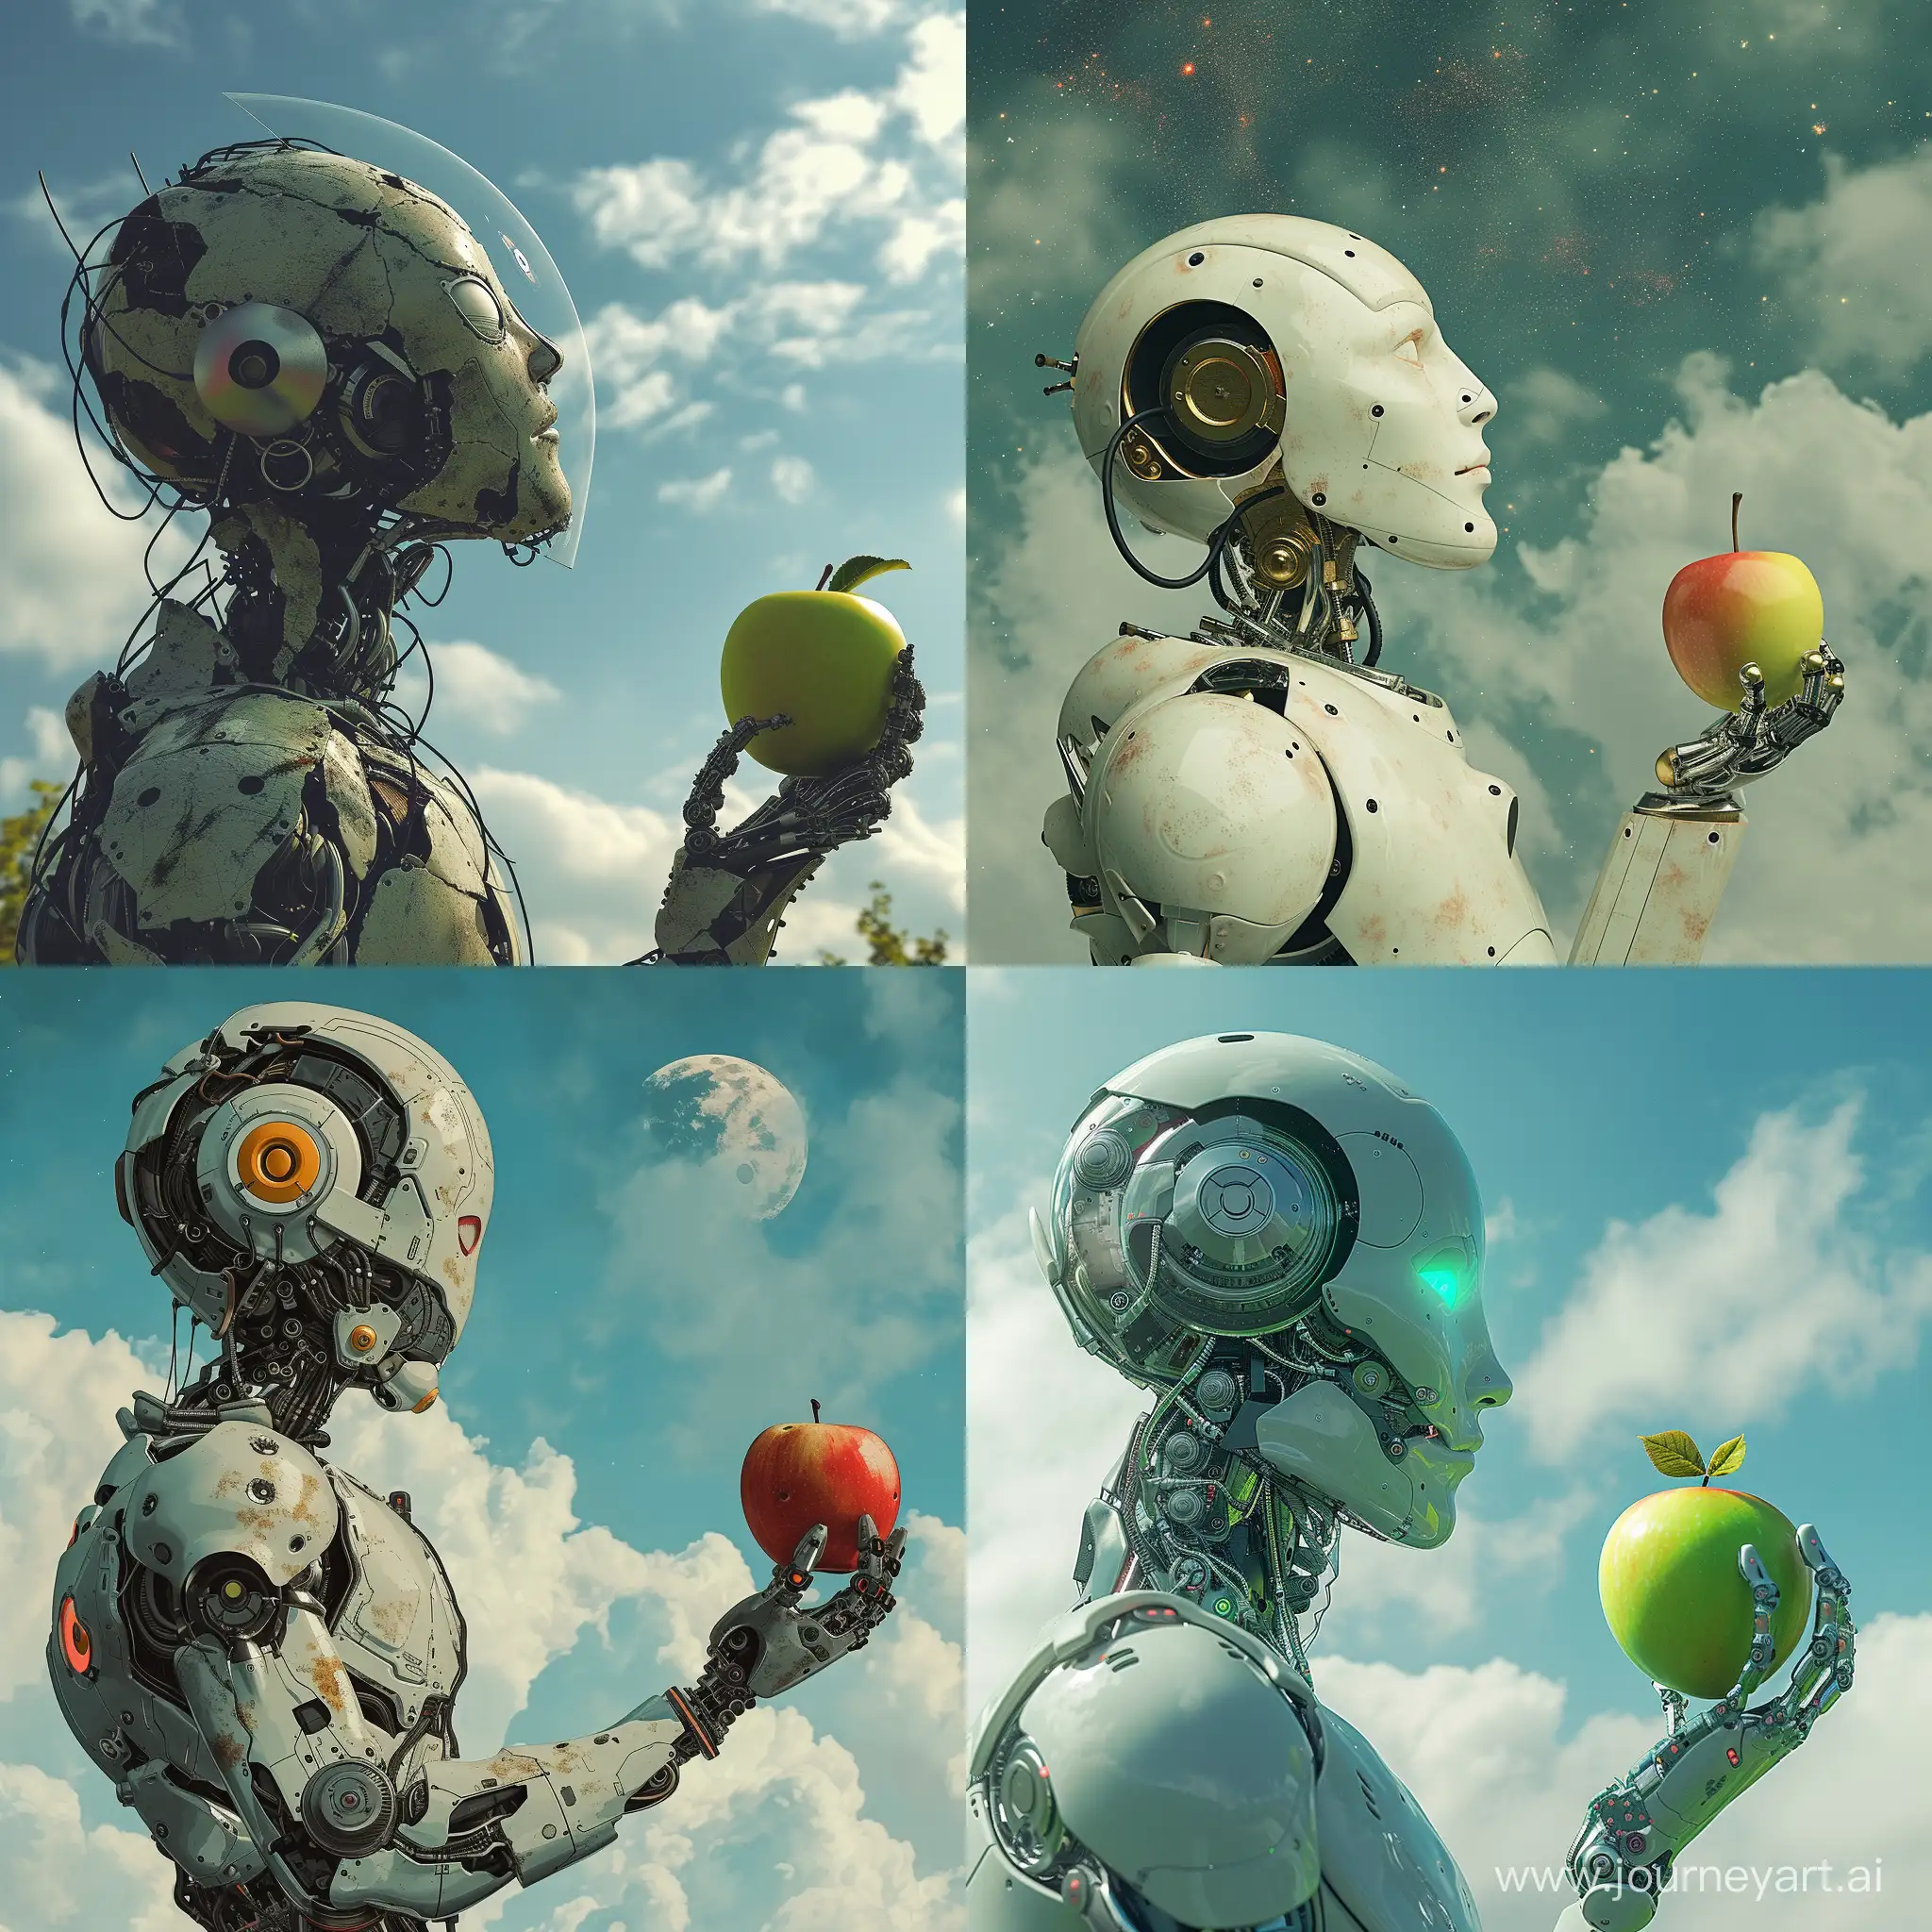 Cyborg-Gazing-at-the-Sky-with-an-Apple